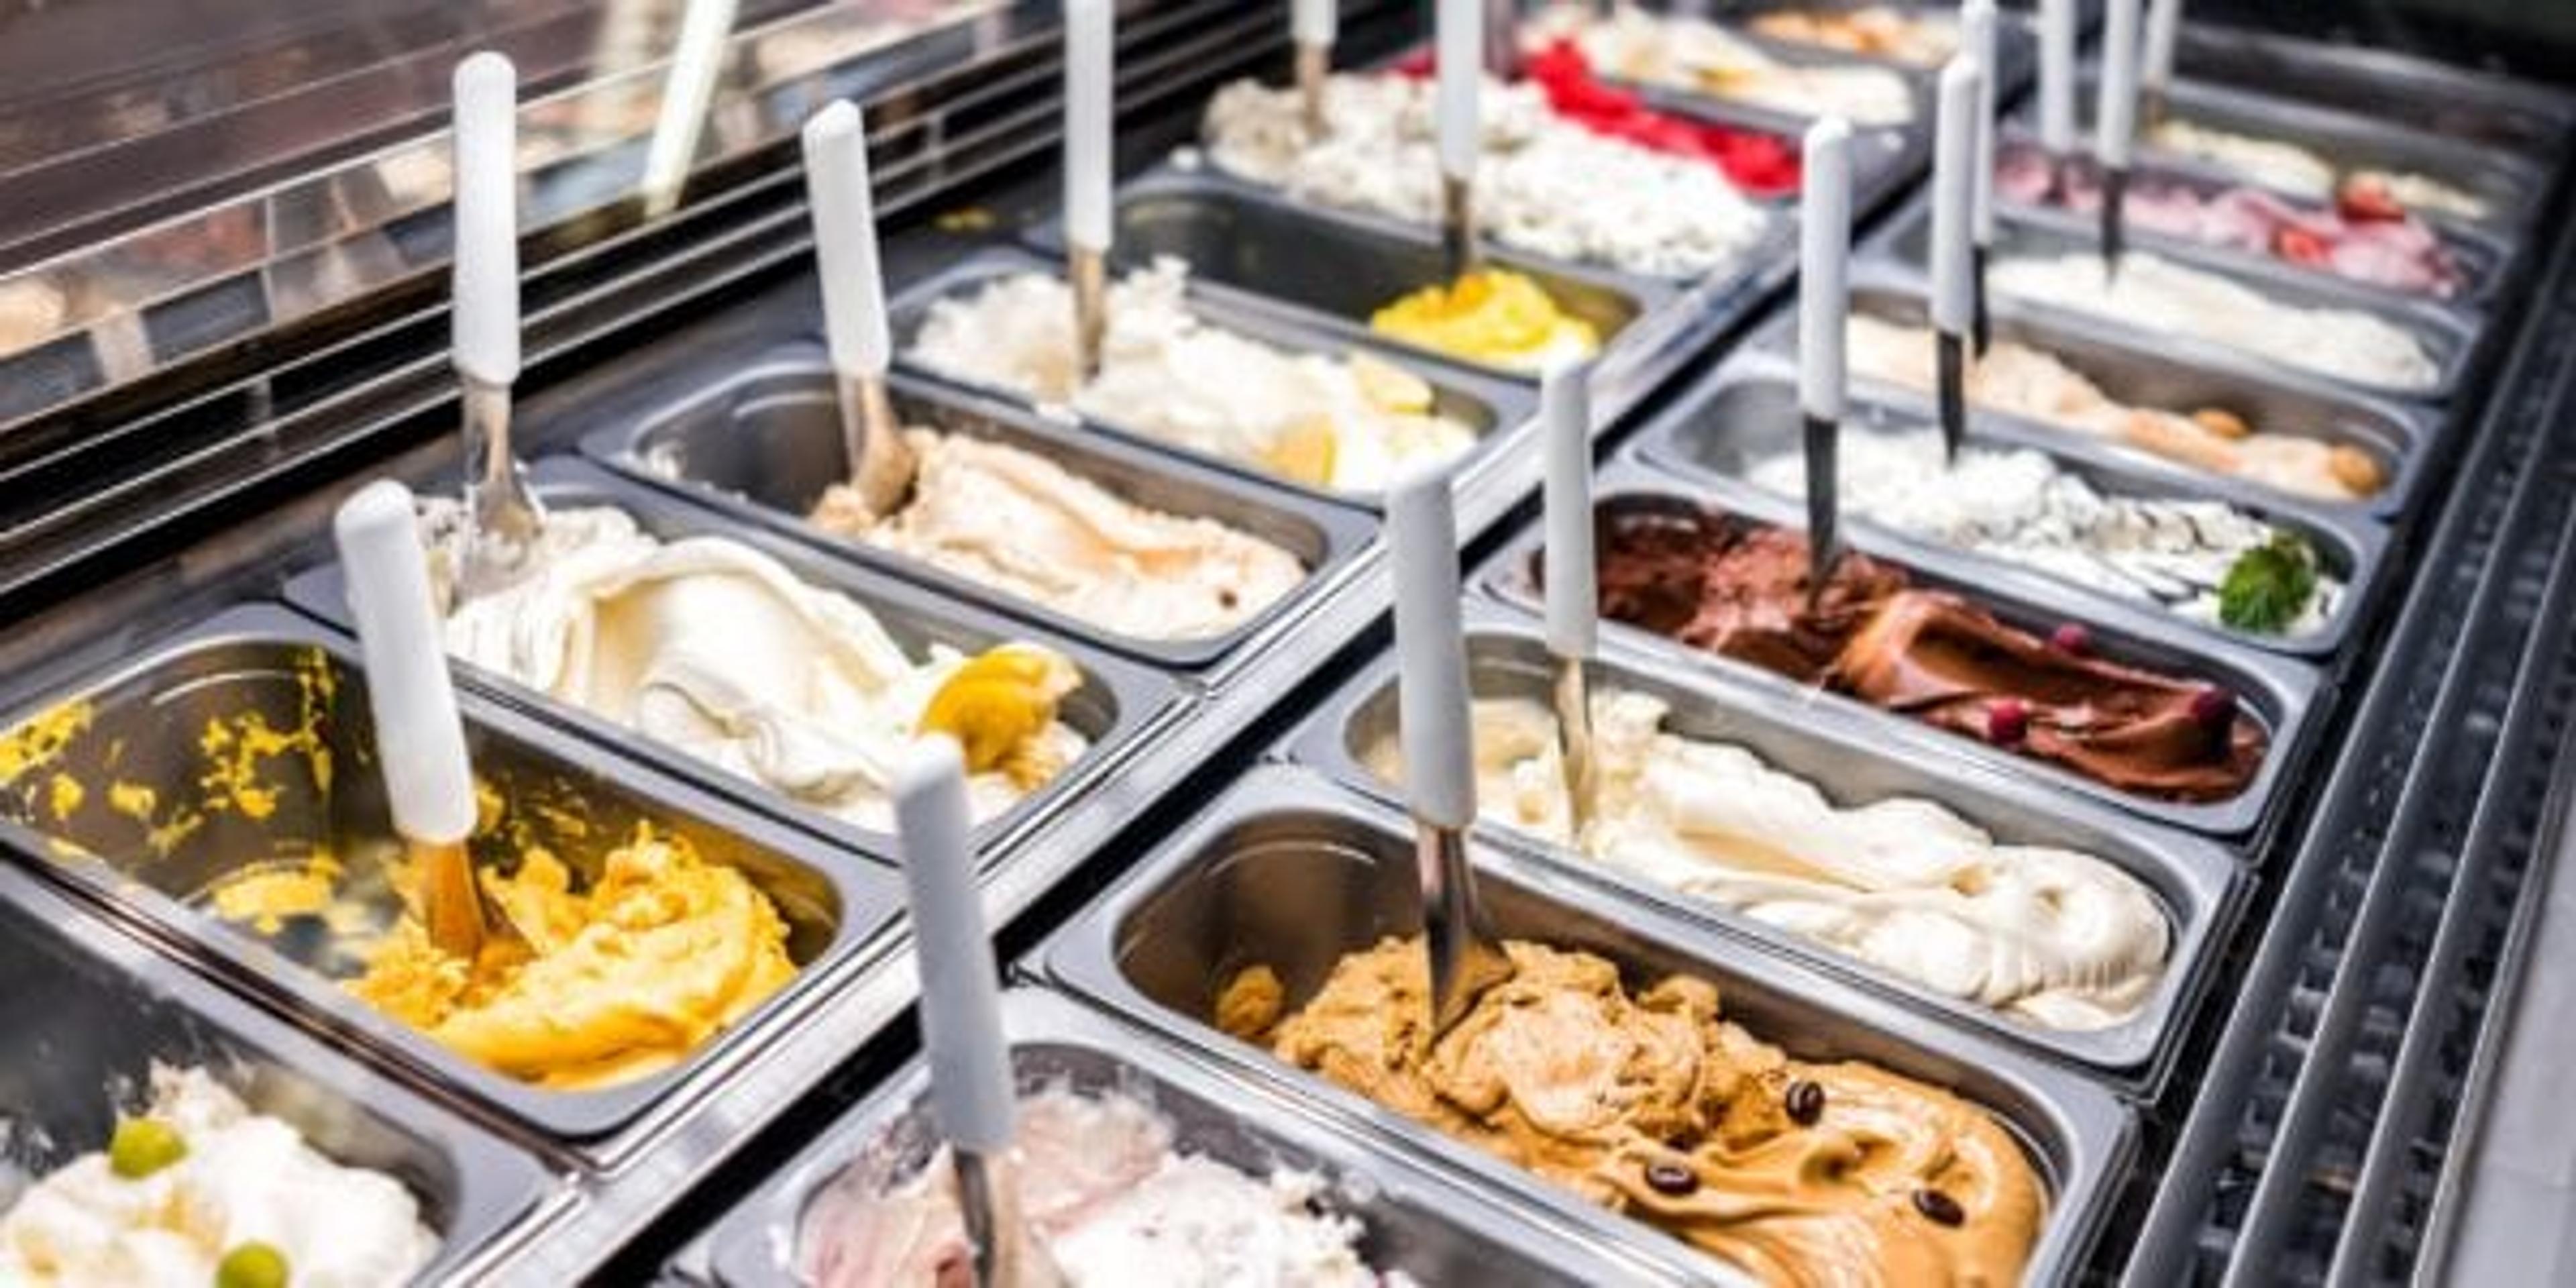 Gelato case filled with many flavors